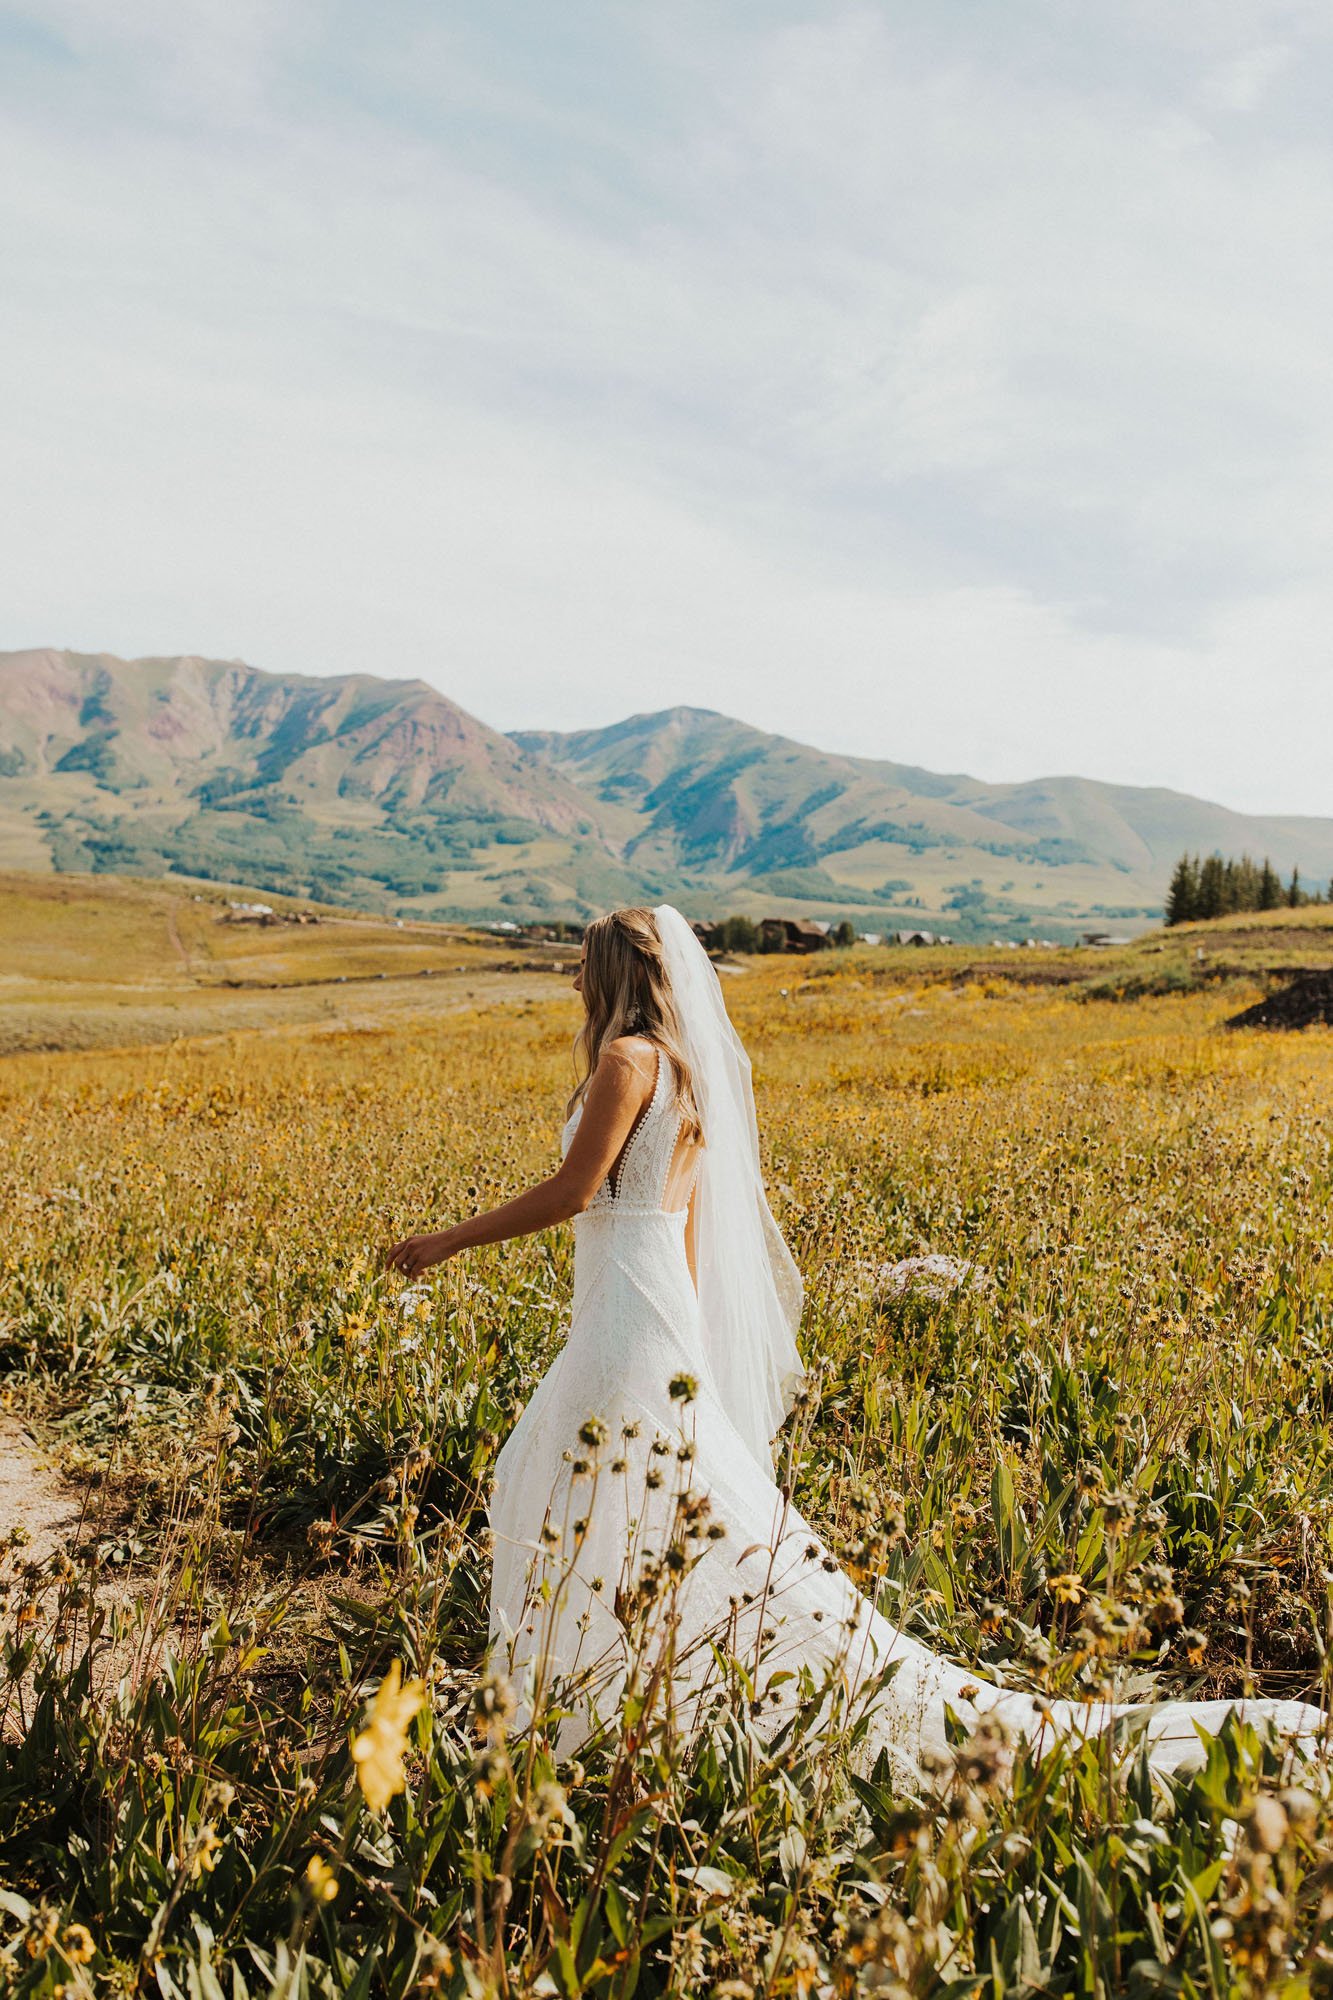  Photograph of a bride wearing Rish Rio wedding dress walking through a field of wildflowers on a sunny day in Crested Butte, Colorado. She has long blonde hair with soft curls and is wearing a Sara Gabriel wedding veil. The lace train of her wedding